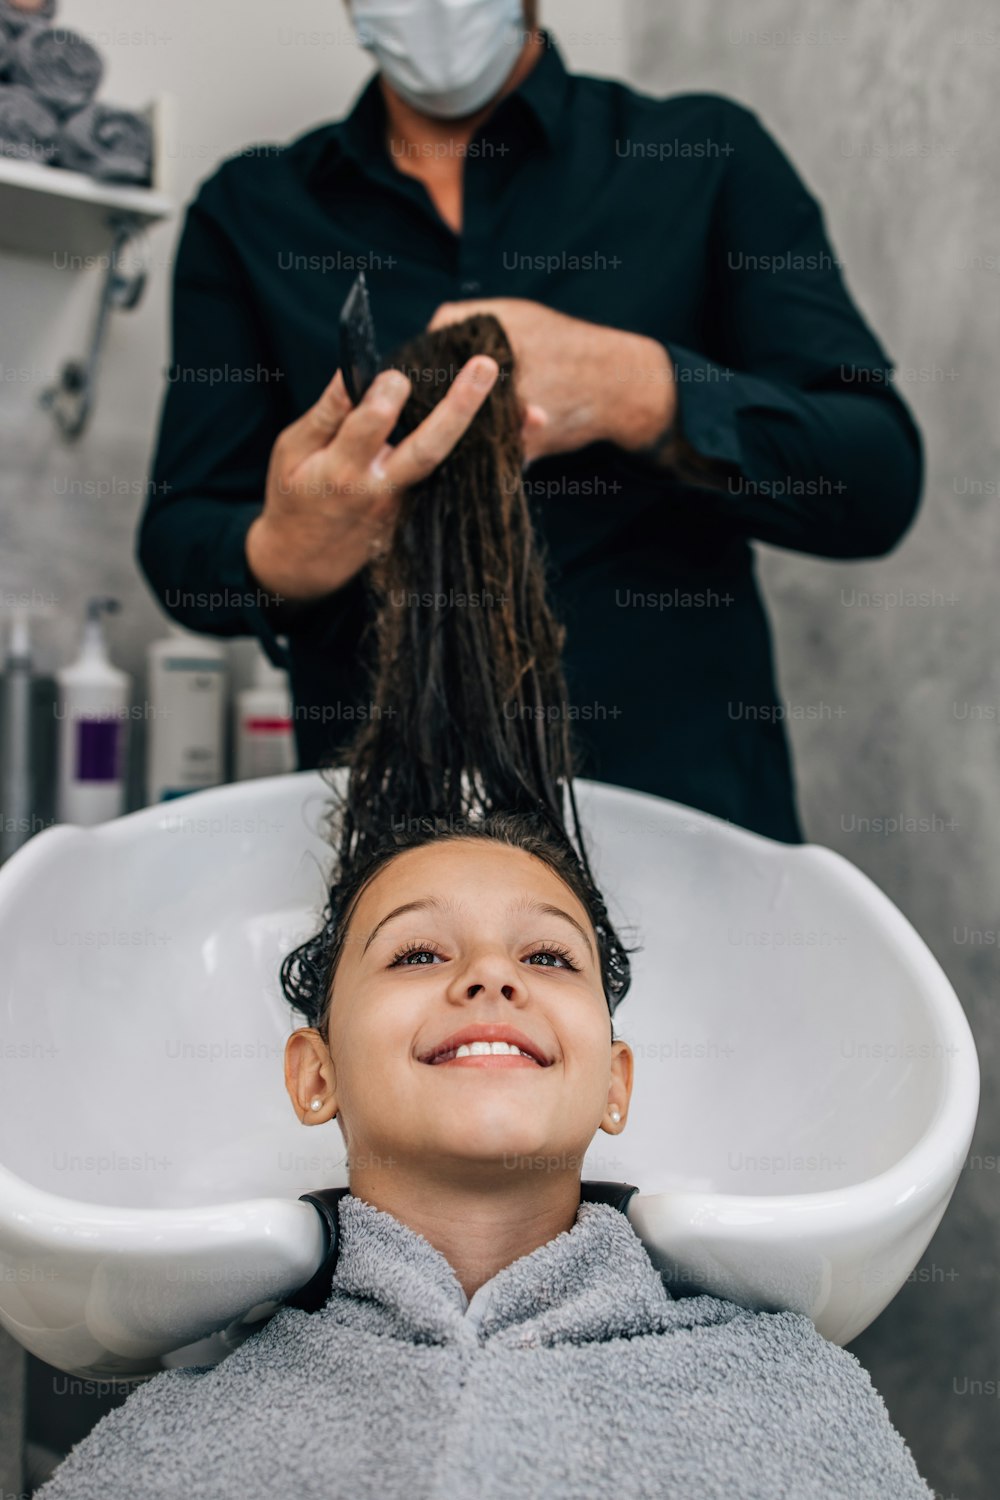 Young girl at hairstyle treatment while professional hairdresser gently washing her hair.